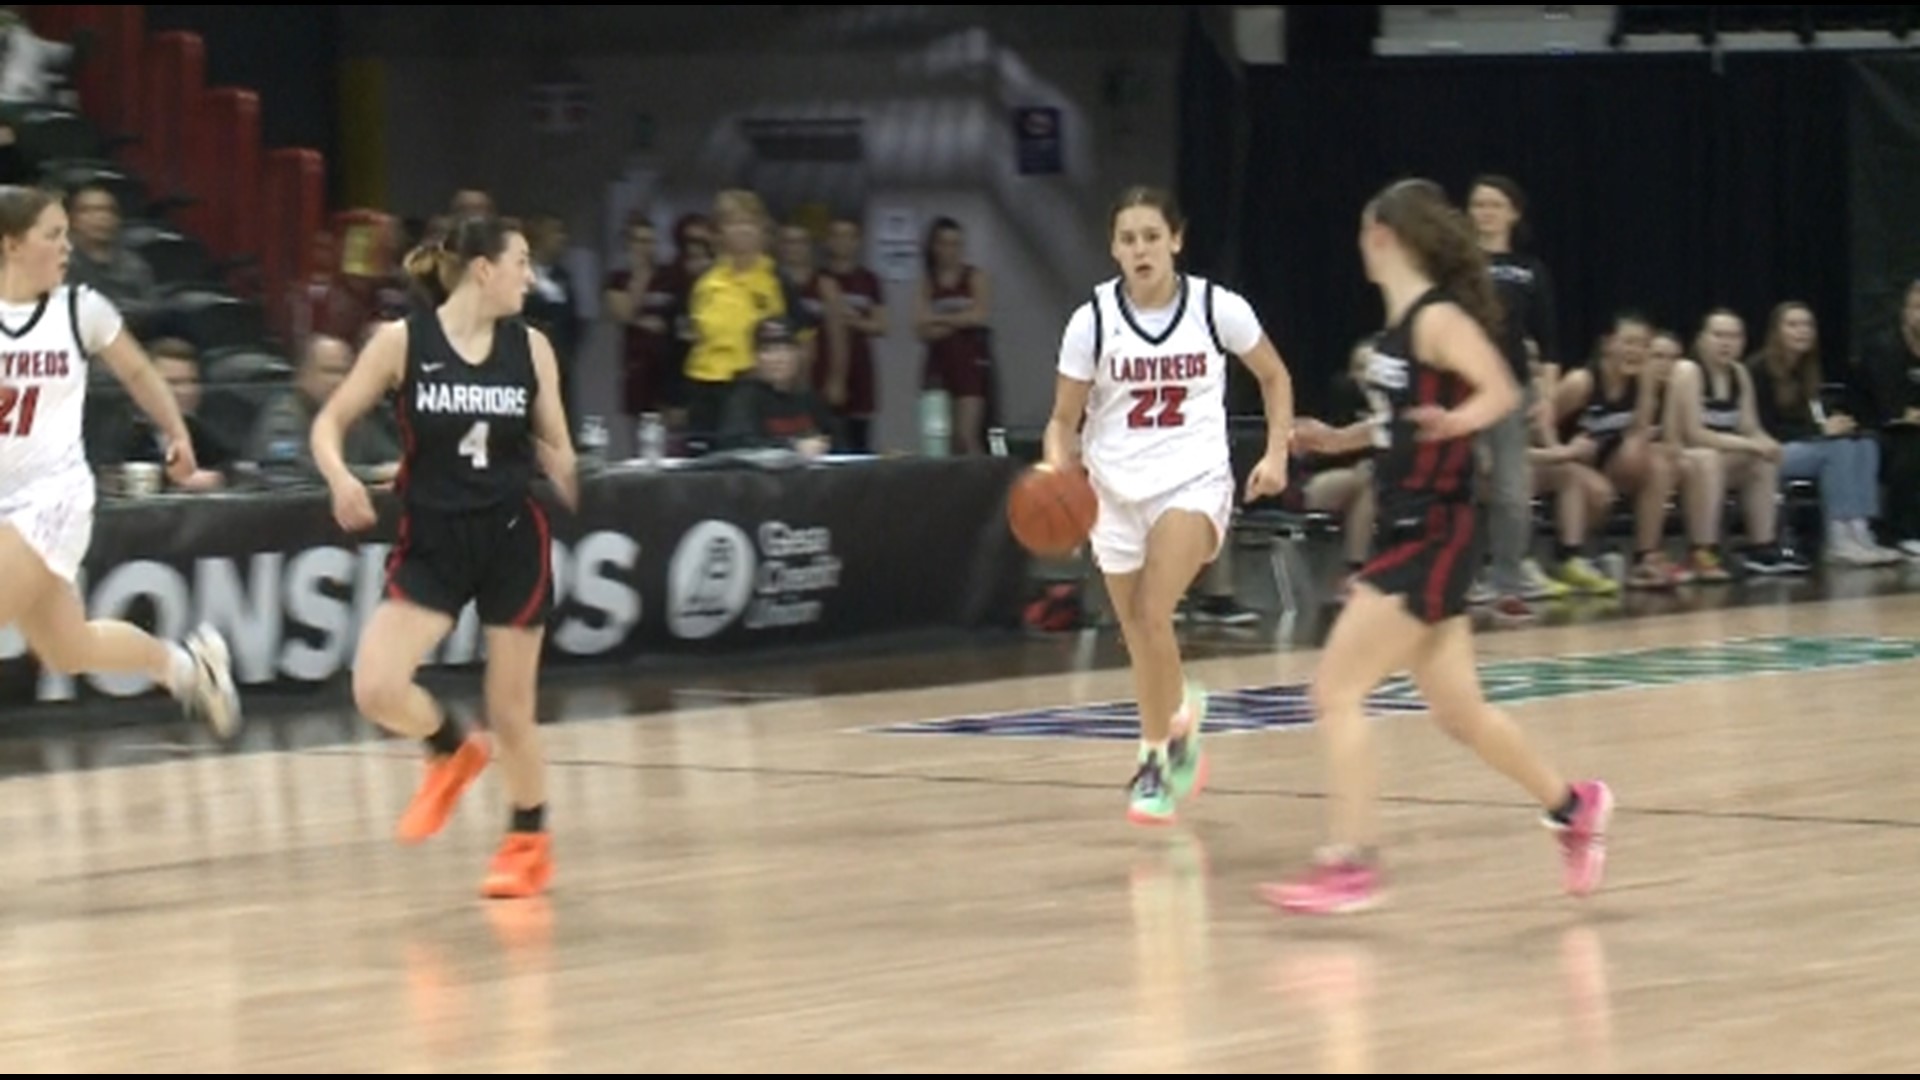 Highlights of the Neah Bay girls 67-34 win over Crosspoint in the 1B State Semifinals (via KREM)